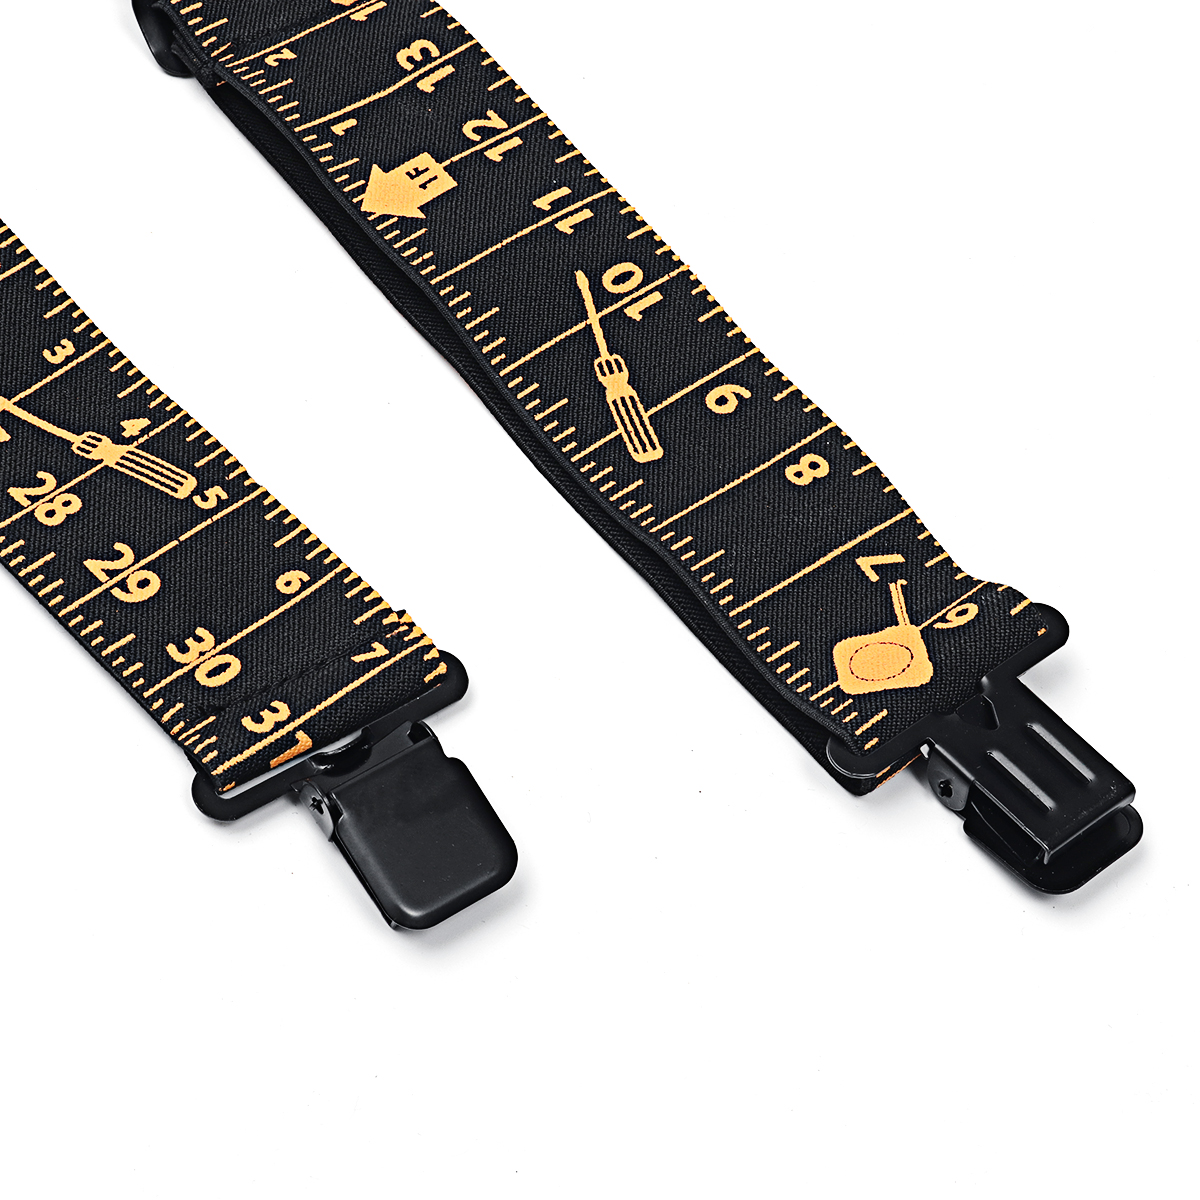 2inch-Wide-Adjustable-Ruler-Heavy-Duty-Belt-Tool-Braces-Suspender-for-Pouch-1570182-7